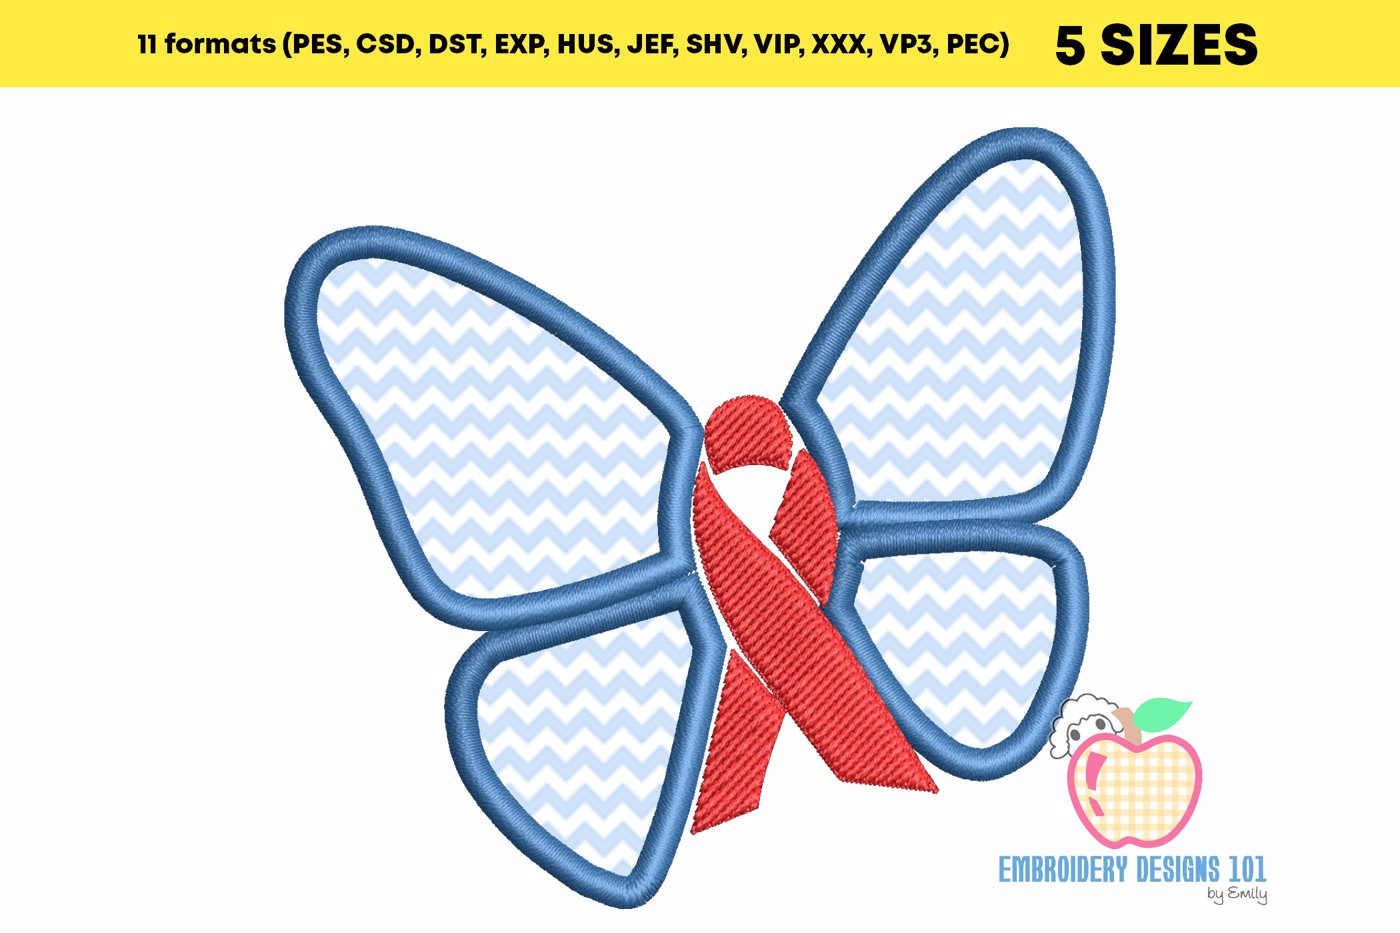 Butterfly in Brest cancer awareness ribbon applique